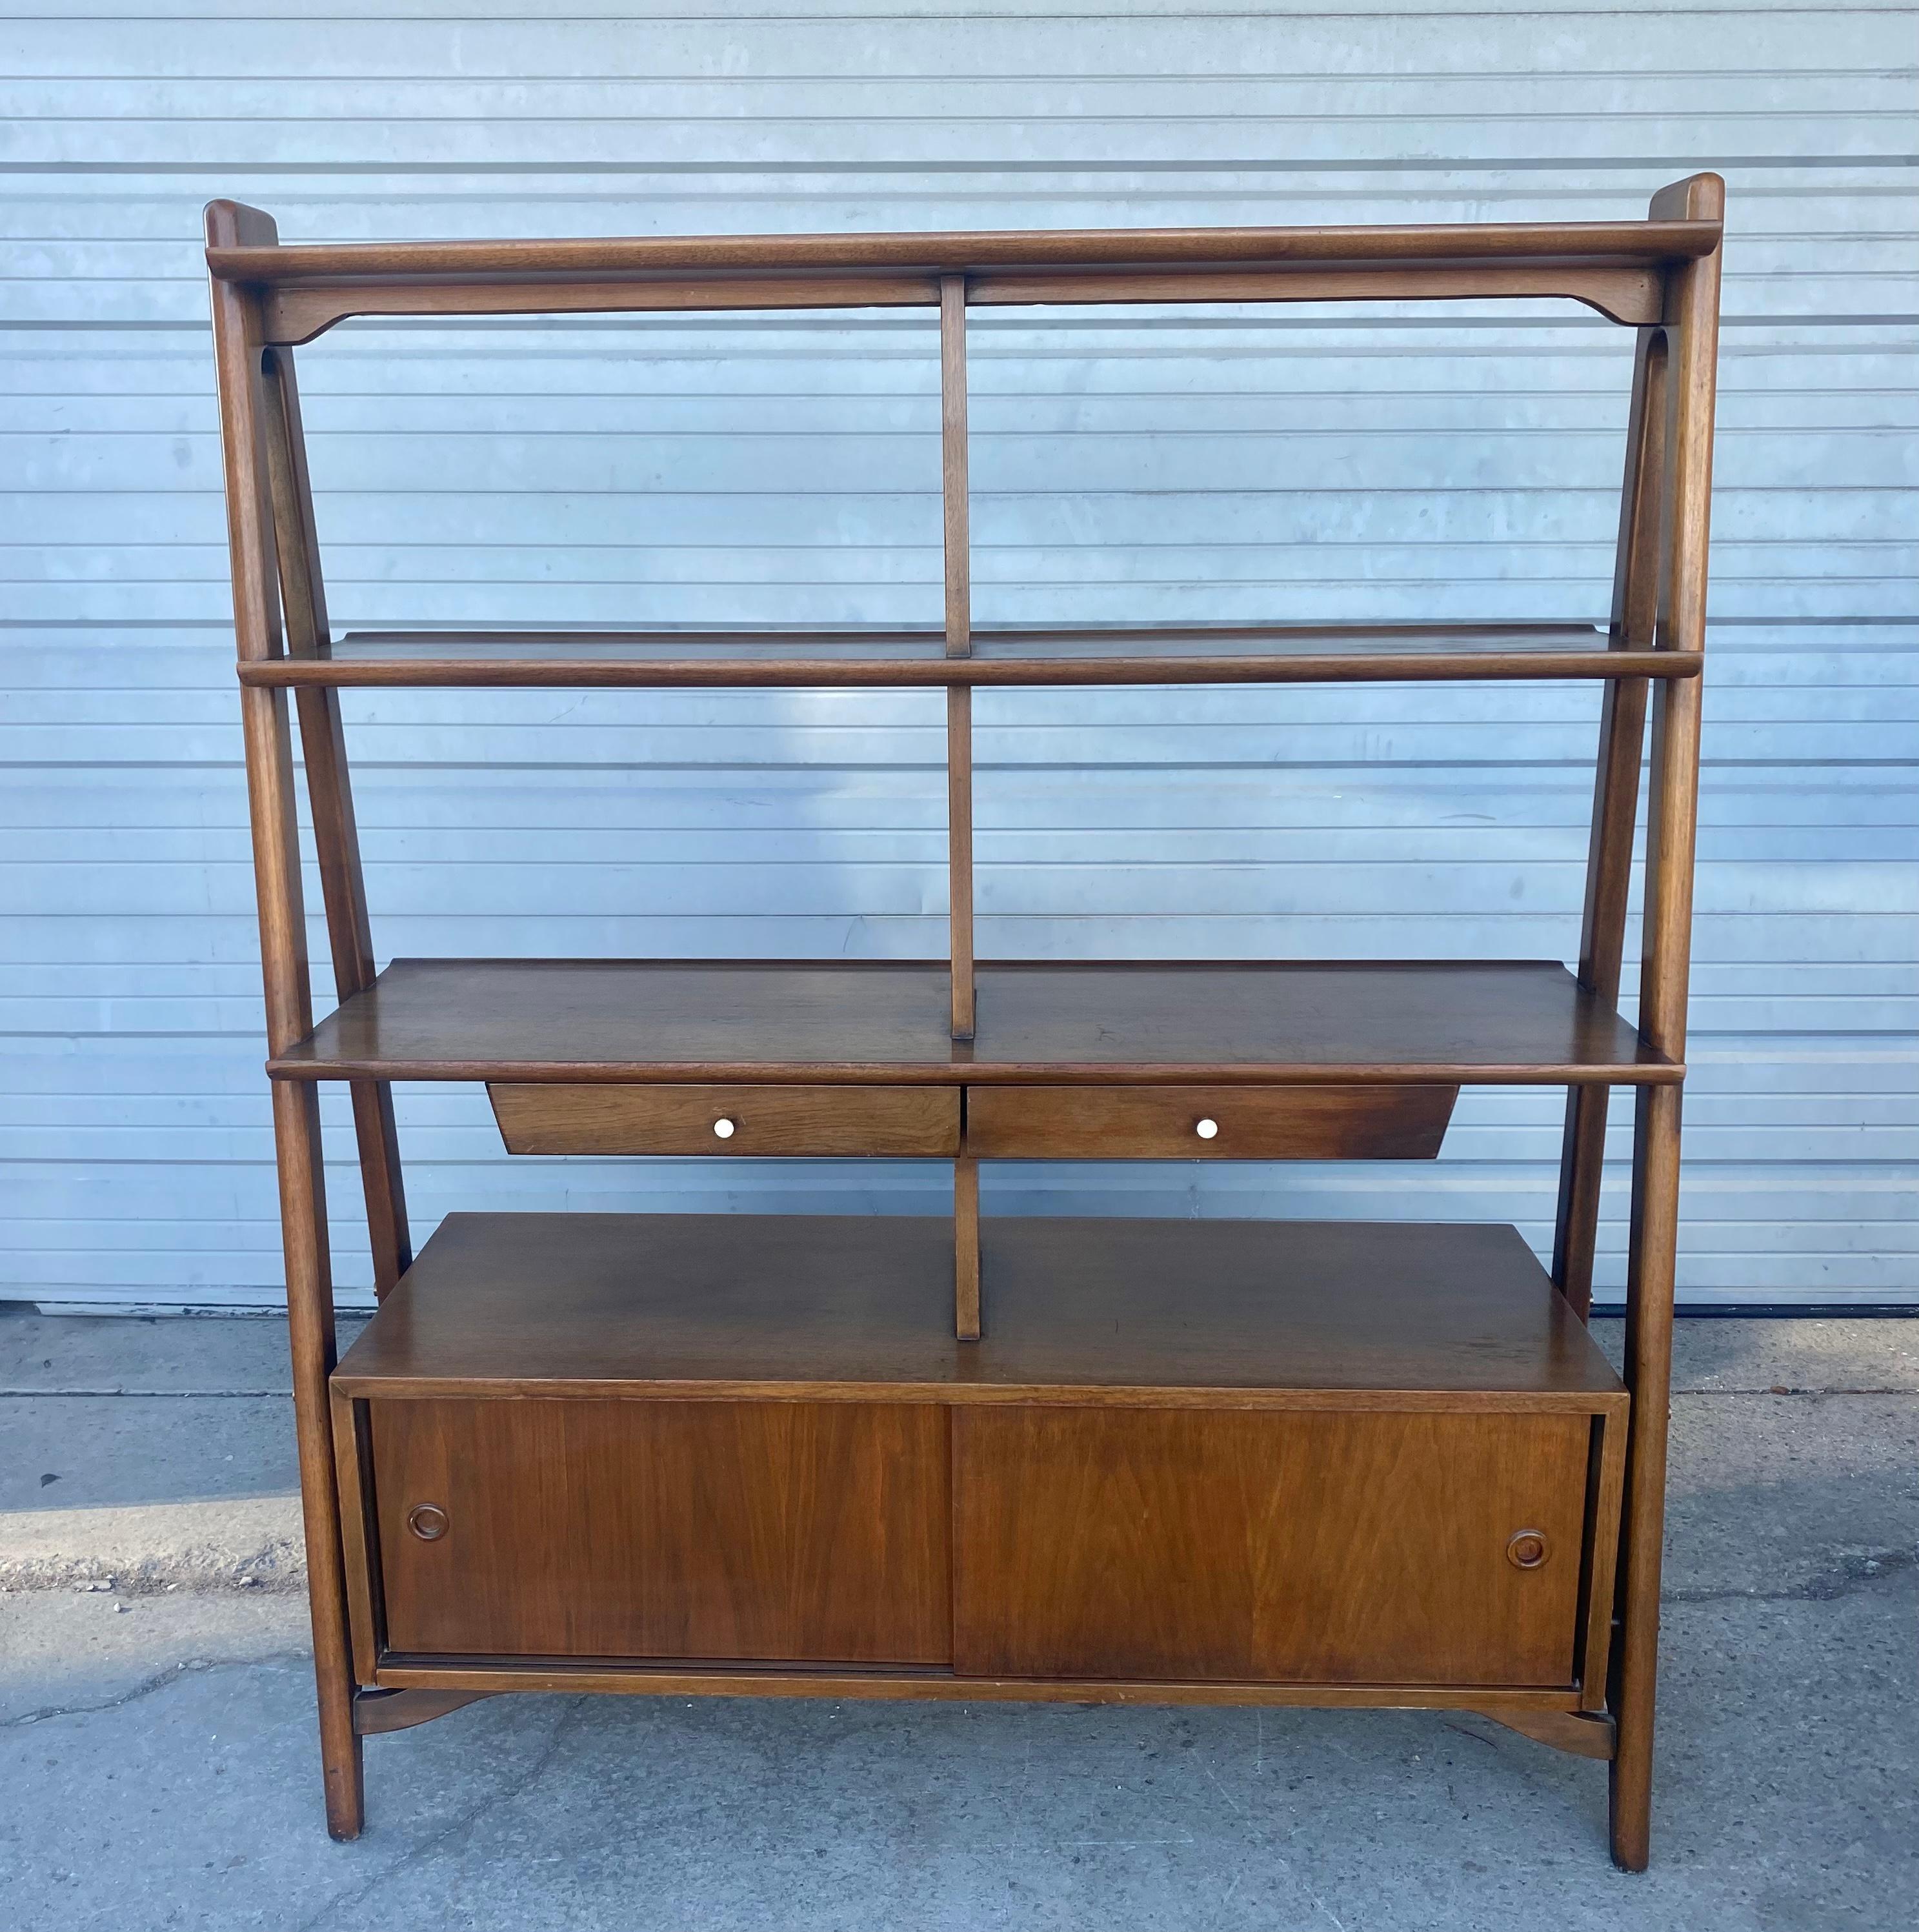 Outstanding and rare American of Martinsville Dania line room divider in walnut. These are barely seen throughout the internet and this one is in amazing original condition, great for any collector of Dania / Martinsville or even just American